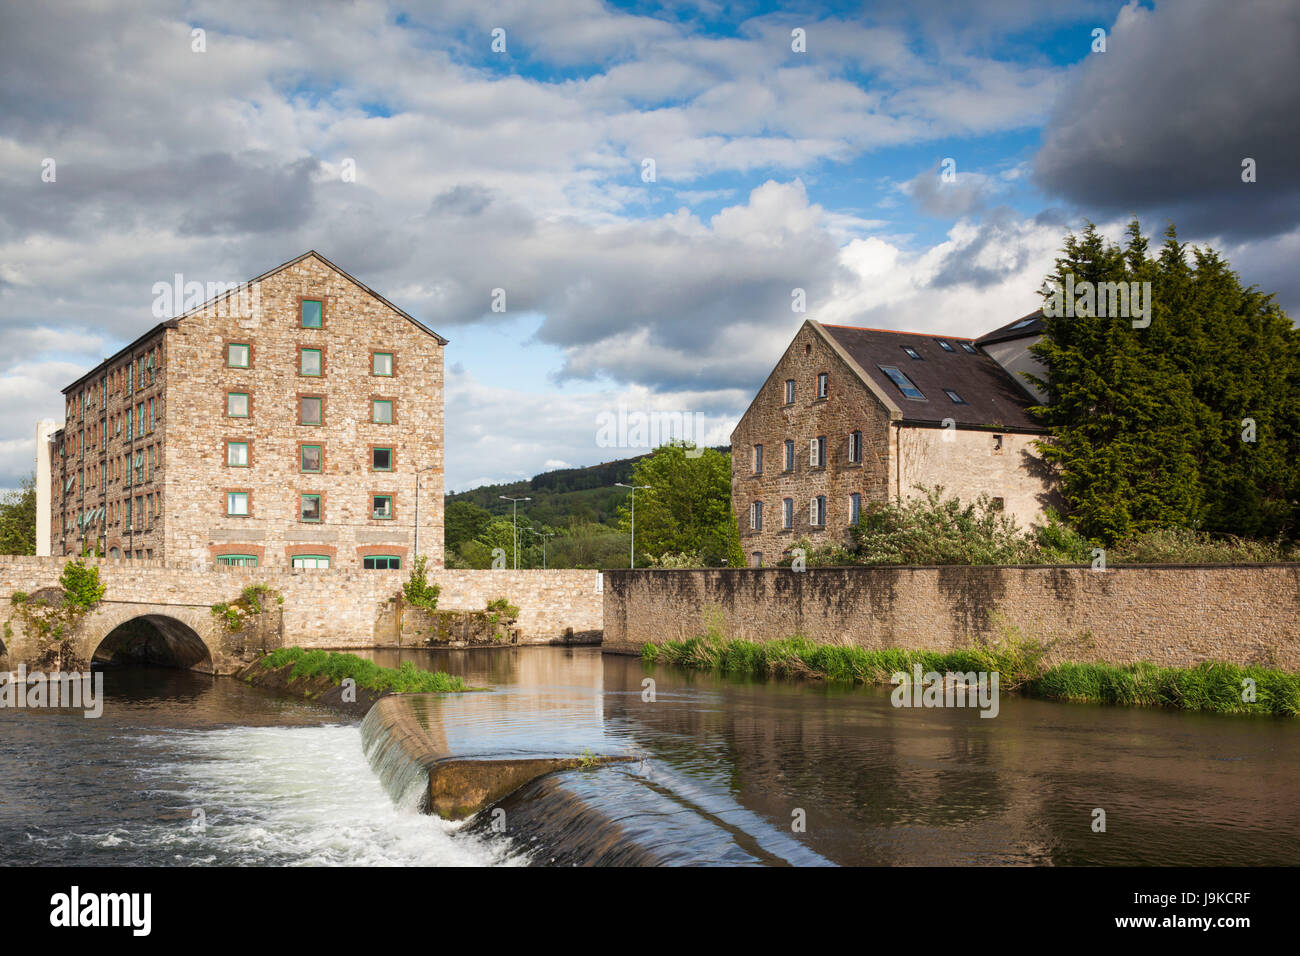 Ireland, County Tipperary, Clonmel, old mill buildings Stock Photo